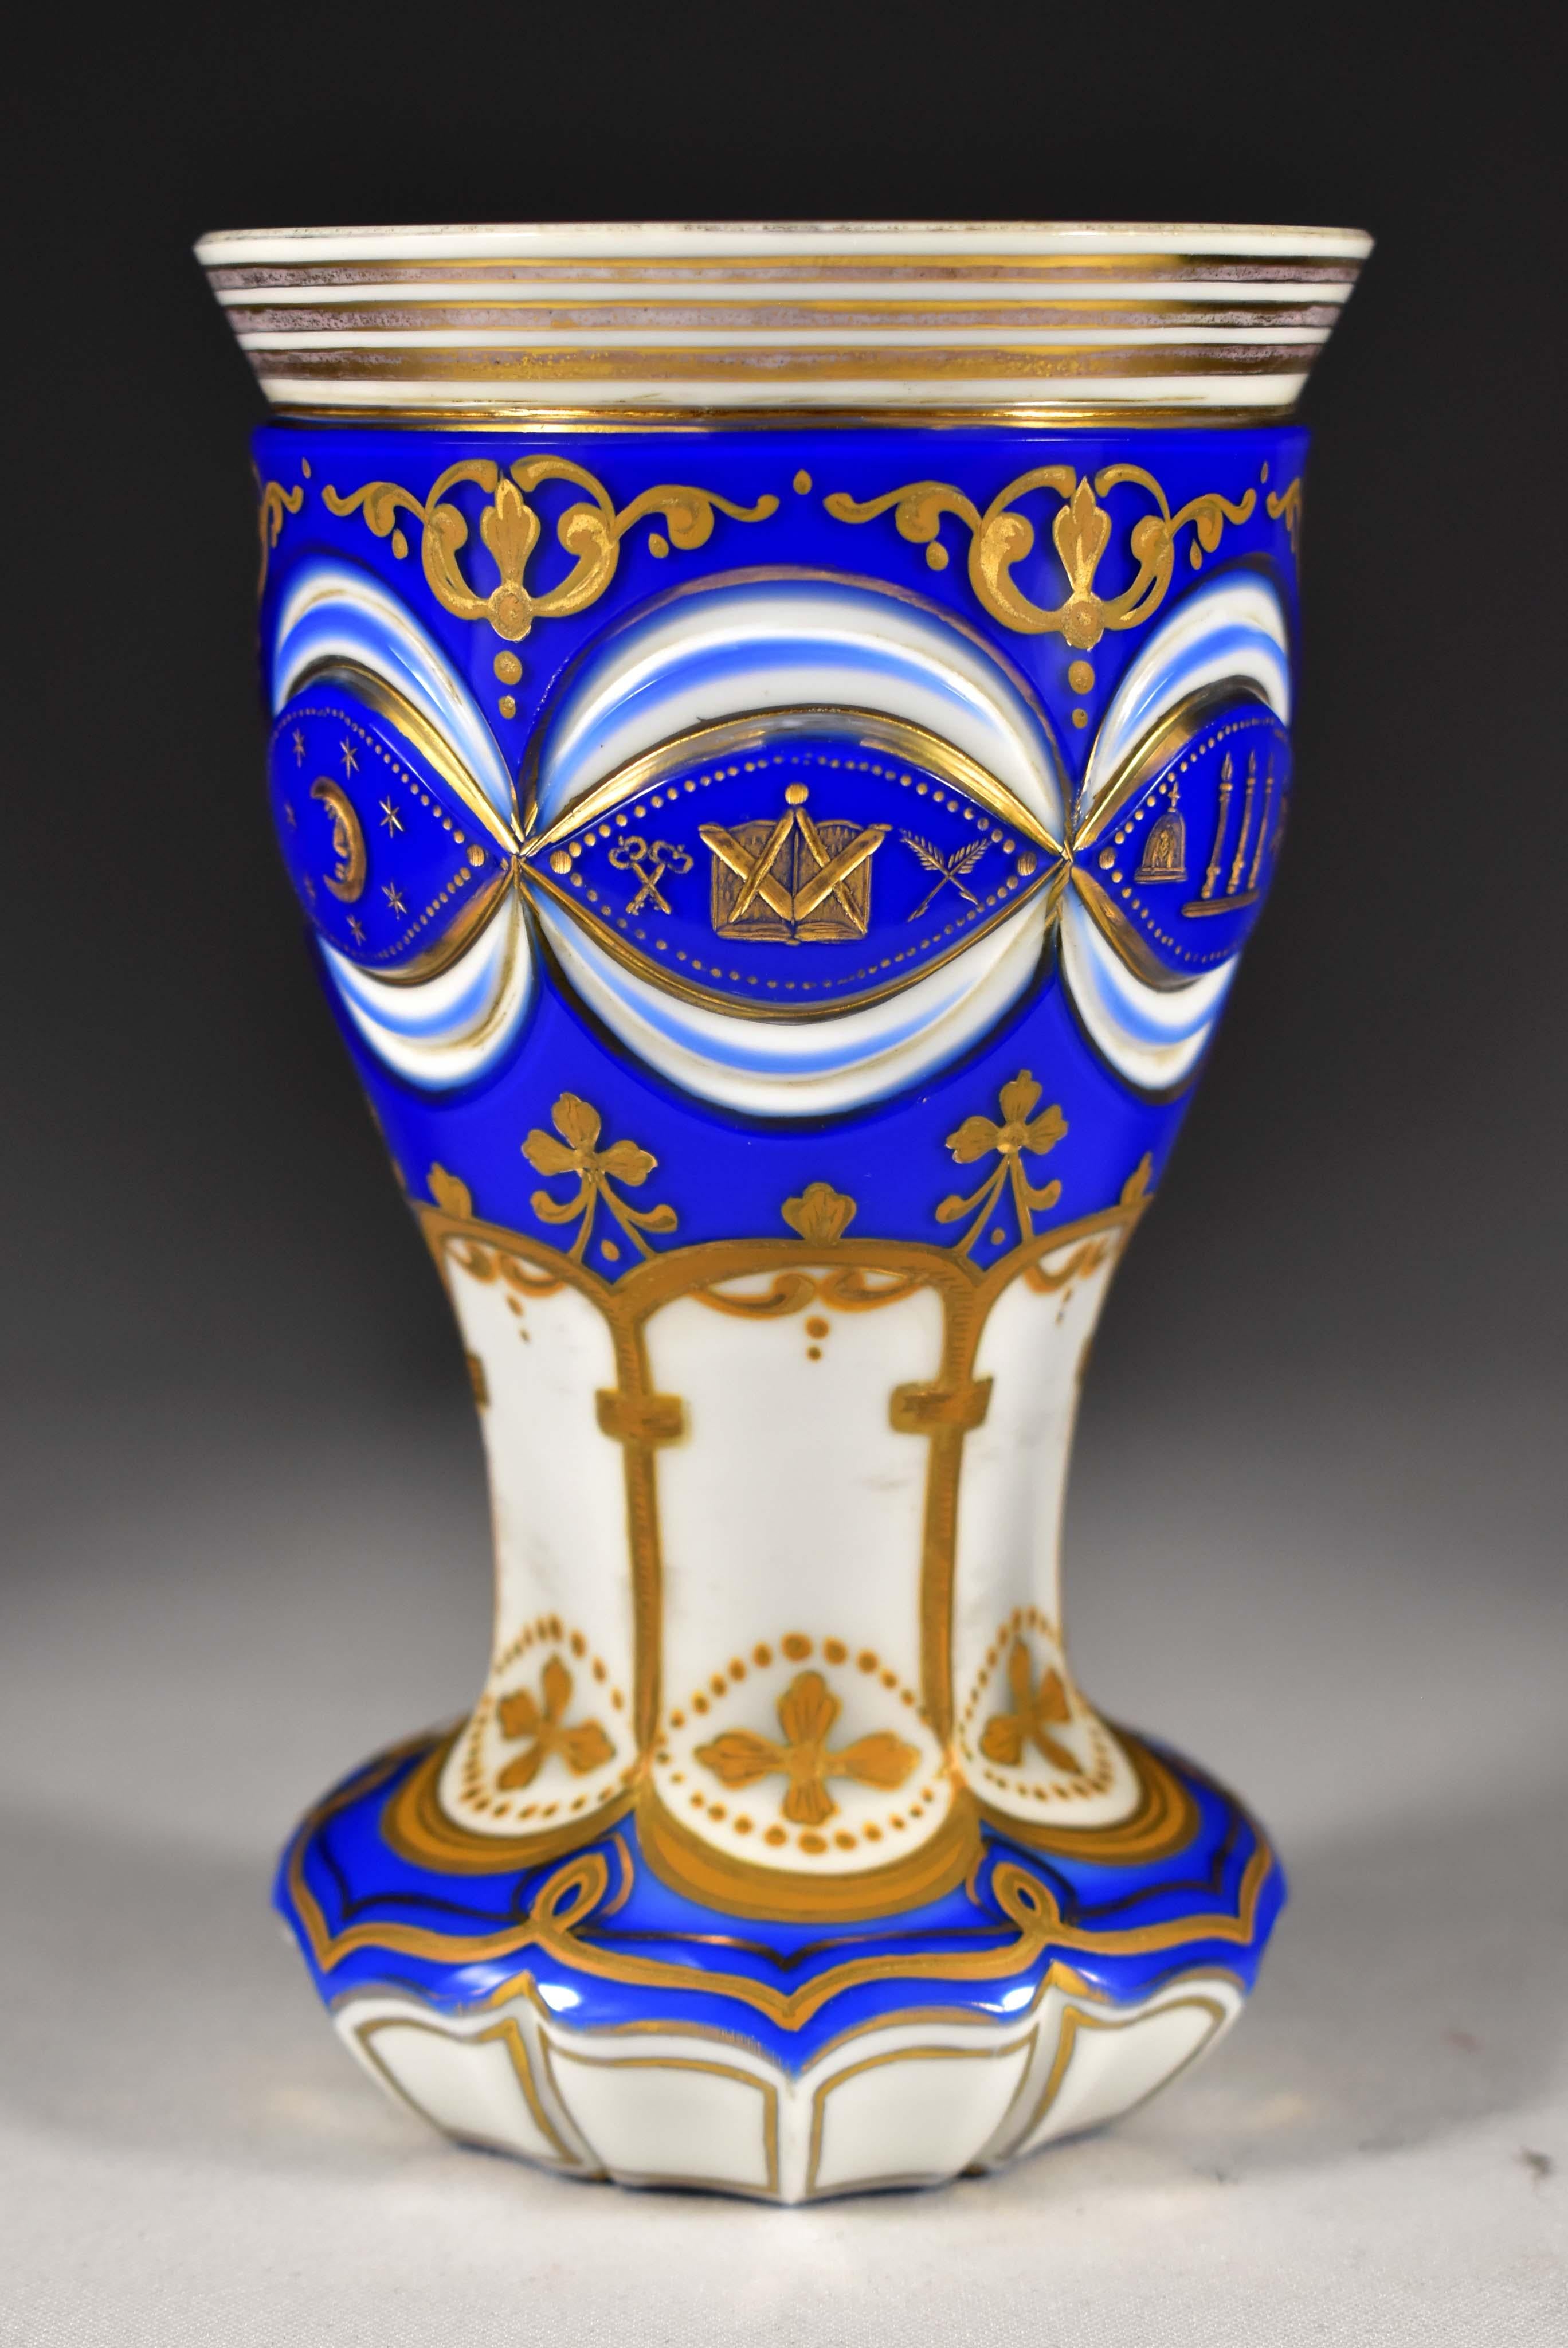 Hand-Crafted Masonic Overlay Goblet-opál and Cobalt Glass Engraved, Cut and Paint 19th Century